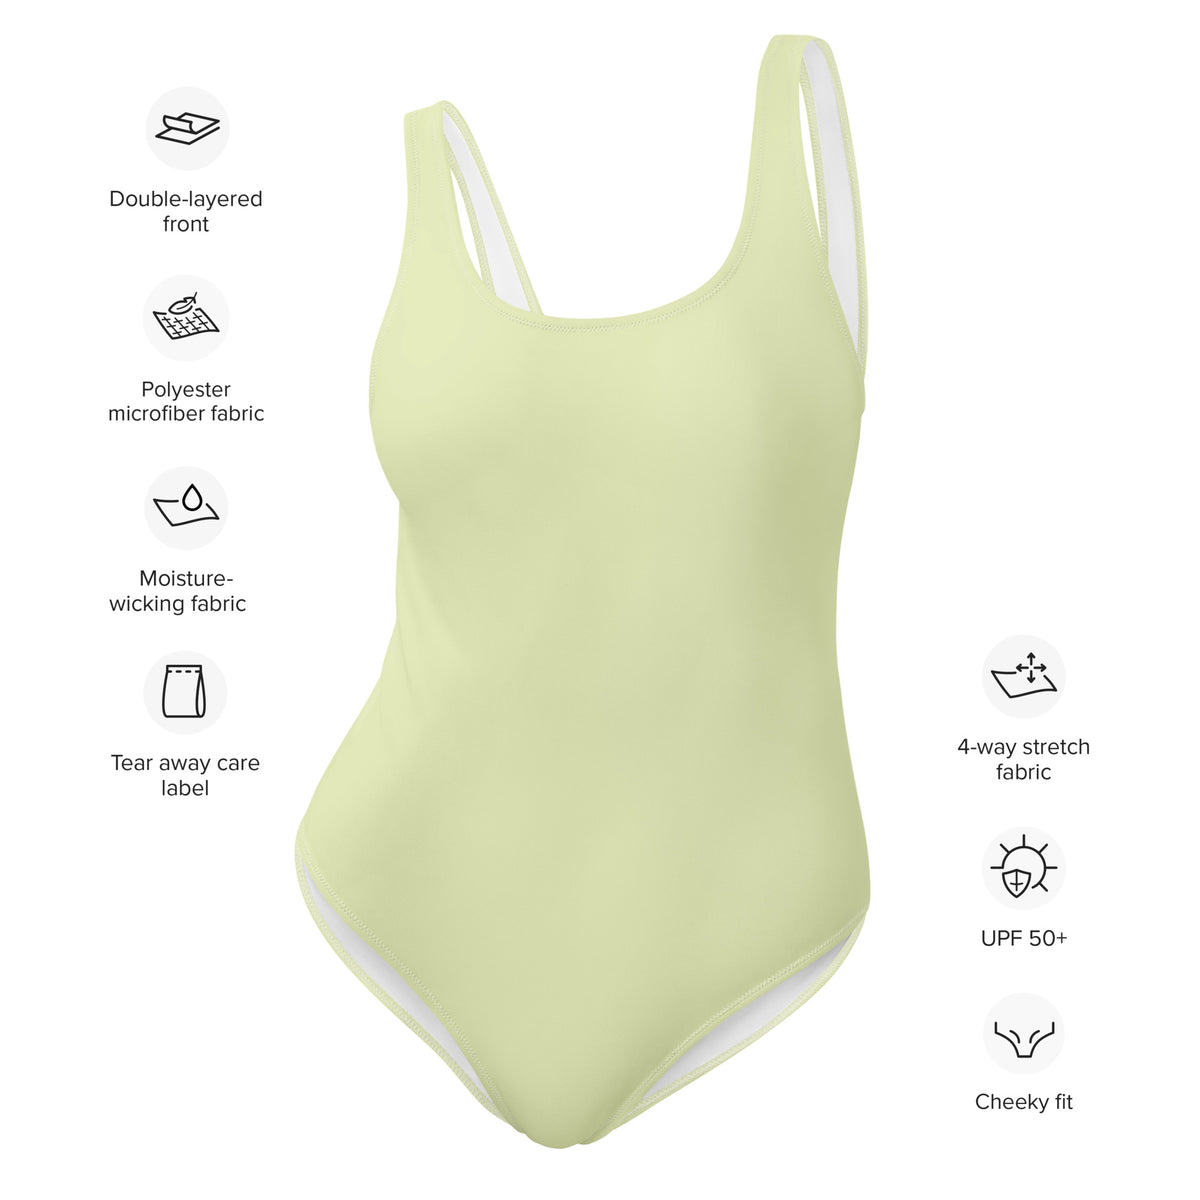 FLORIDA ECO ONE PIECE SWIMSUIT - PASTEL LIME